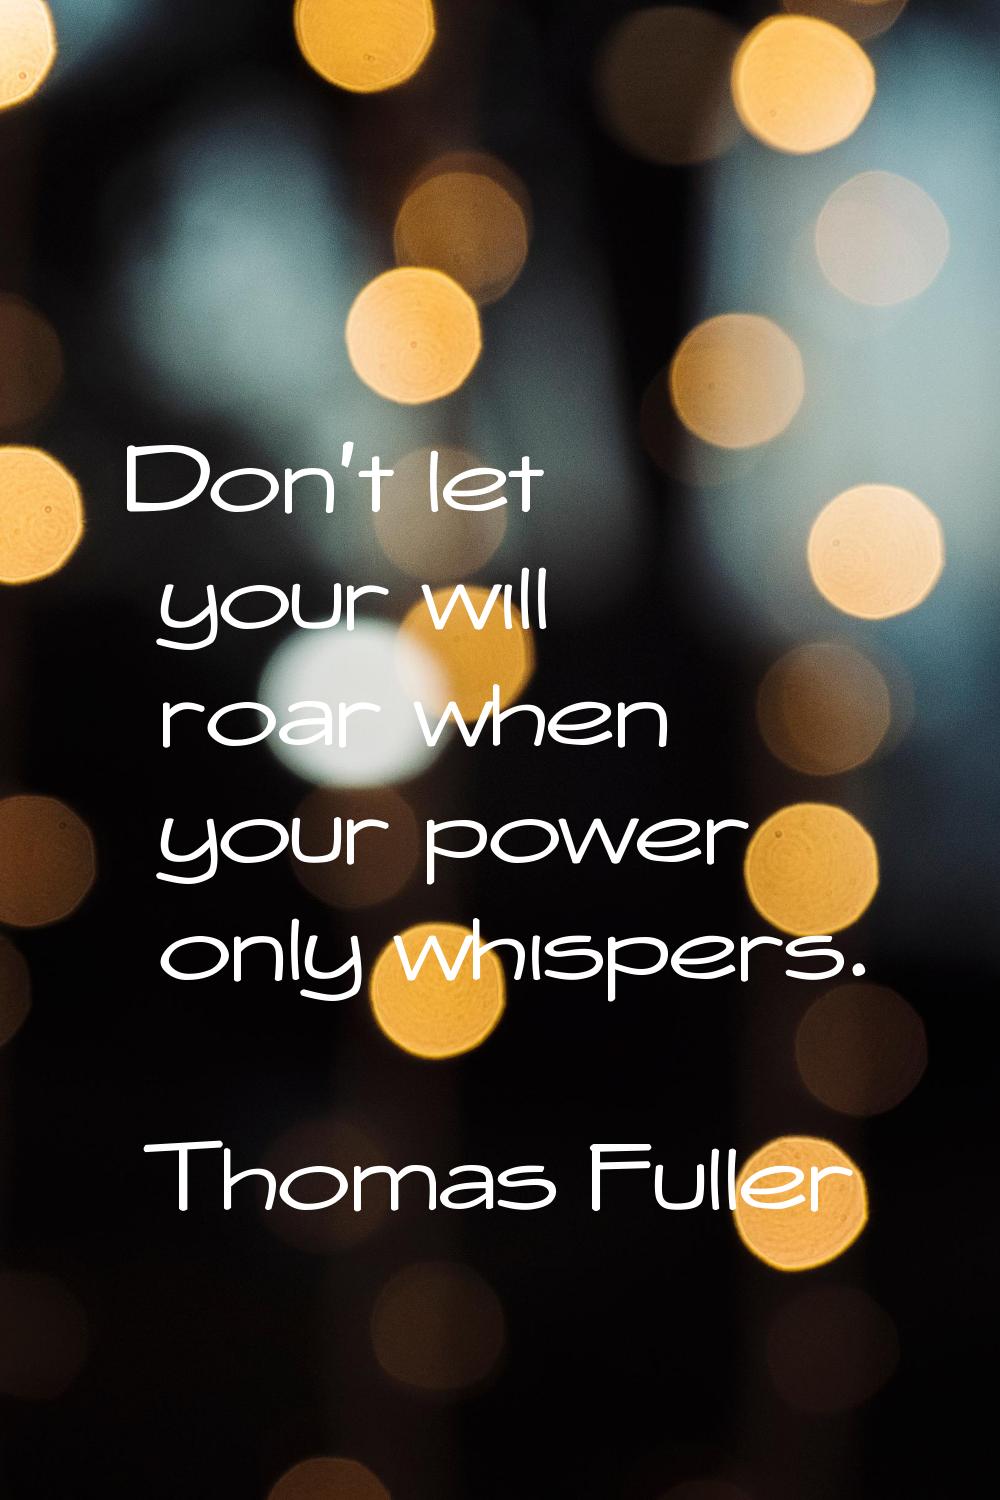 Don't let your will roar when your power only whispers.